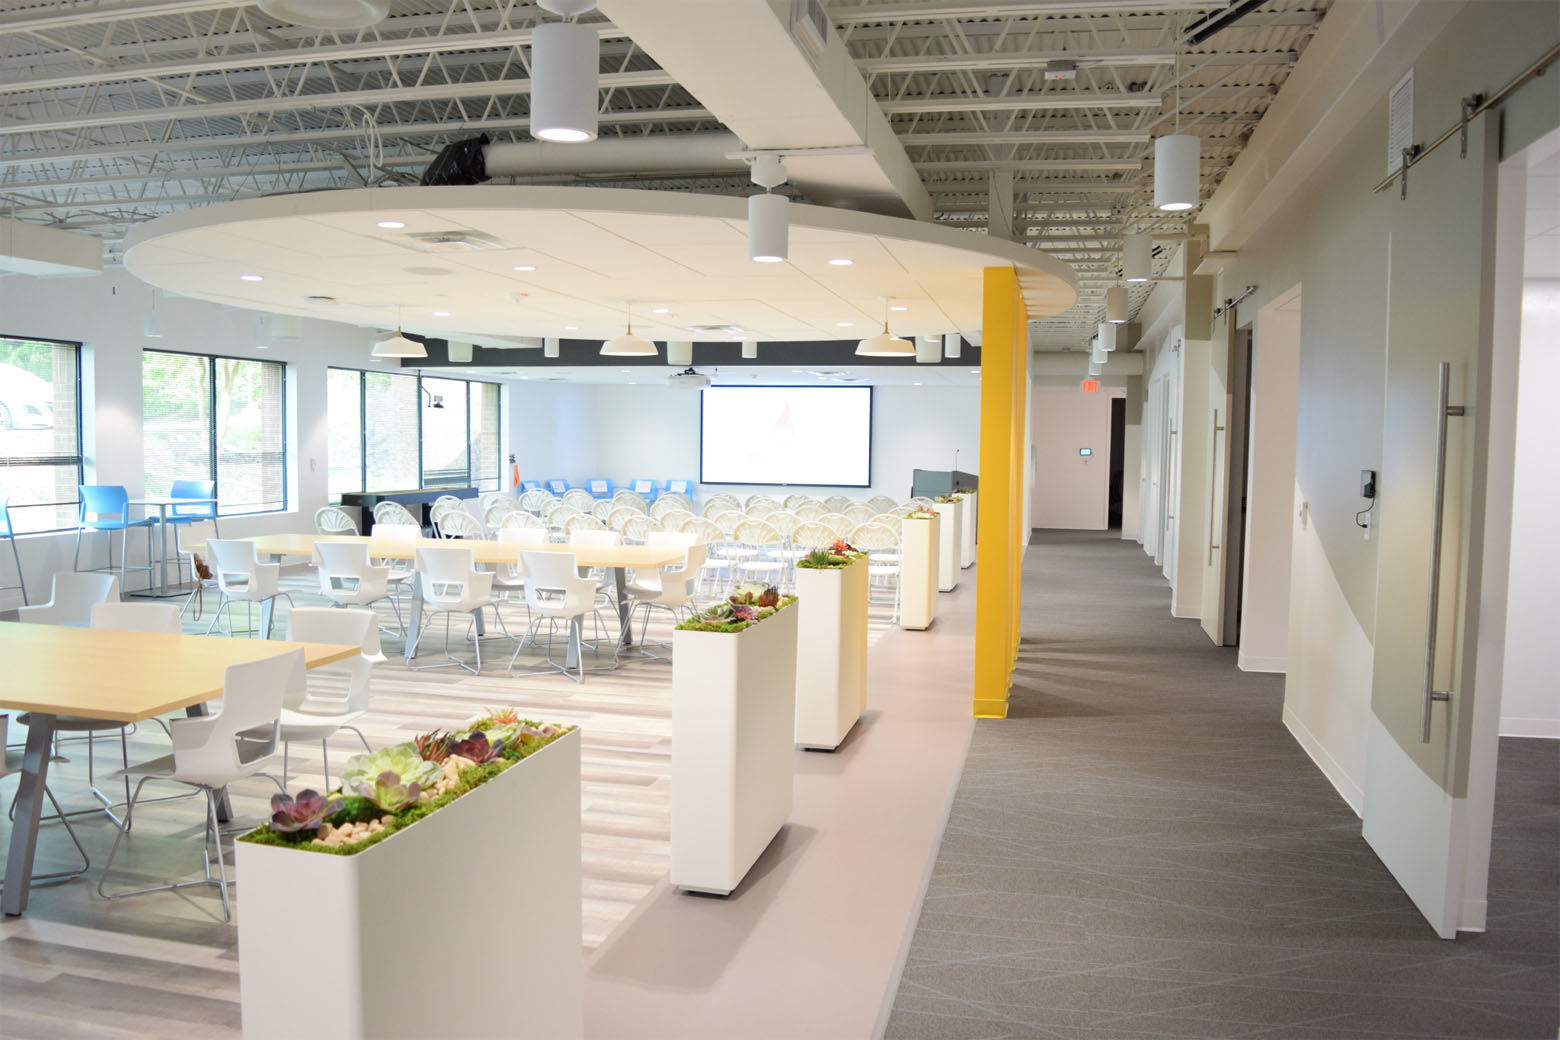 SparkPost's new Columbia headquarters boasts modern design and an open floor plan for easy cross-department collaboration. (Courtesy SparkPost)